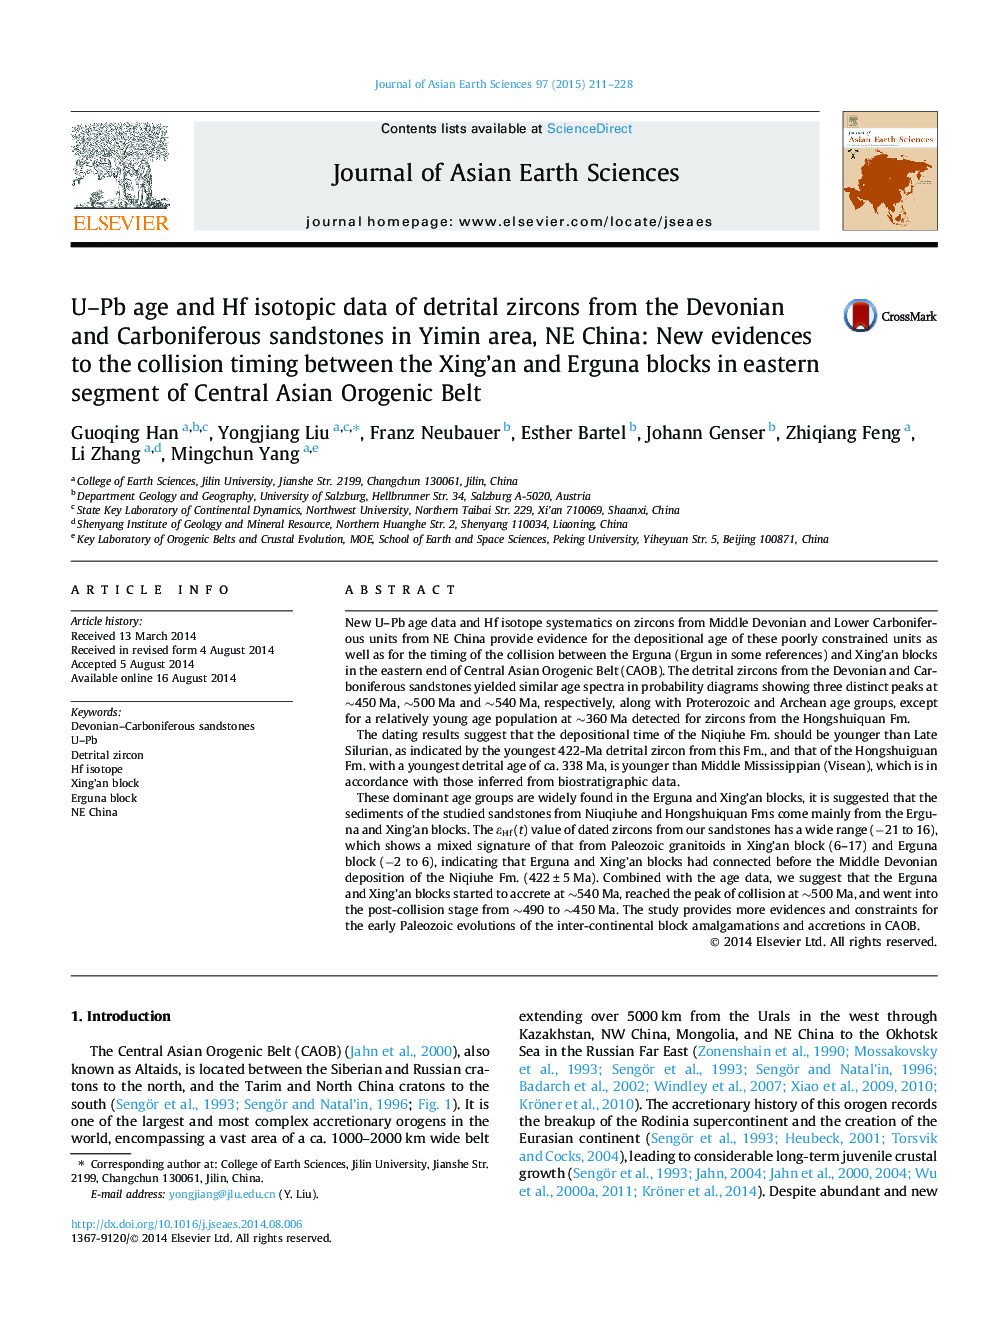 U–Pb age and Hf isotopic data of detrital zircons from the Devonian and Carboniferous sandstones in Yimin area, NE China: New evidences to the collision timing between the Xing’an and Erguna blocks in eastern segment of Central Asian Orogenic Belt